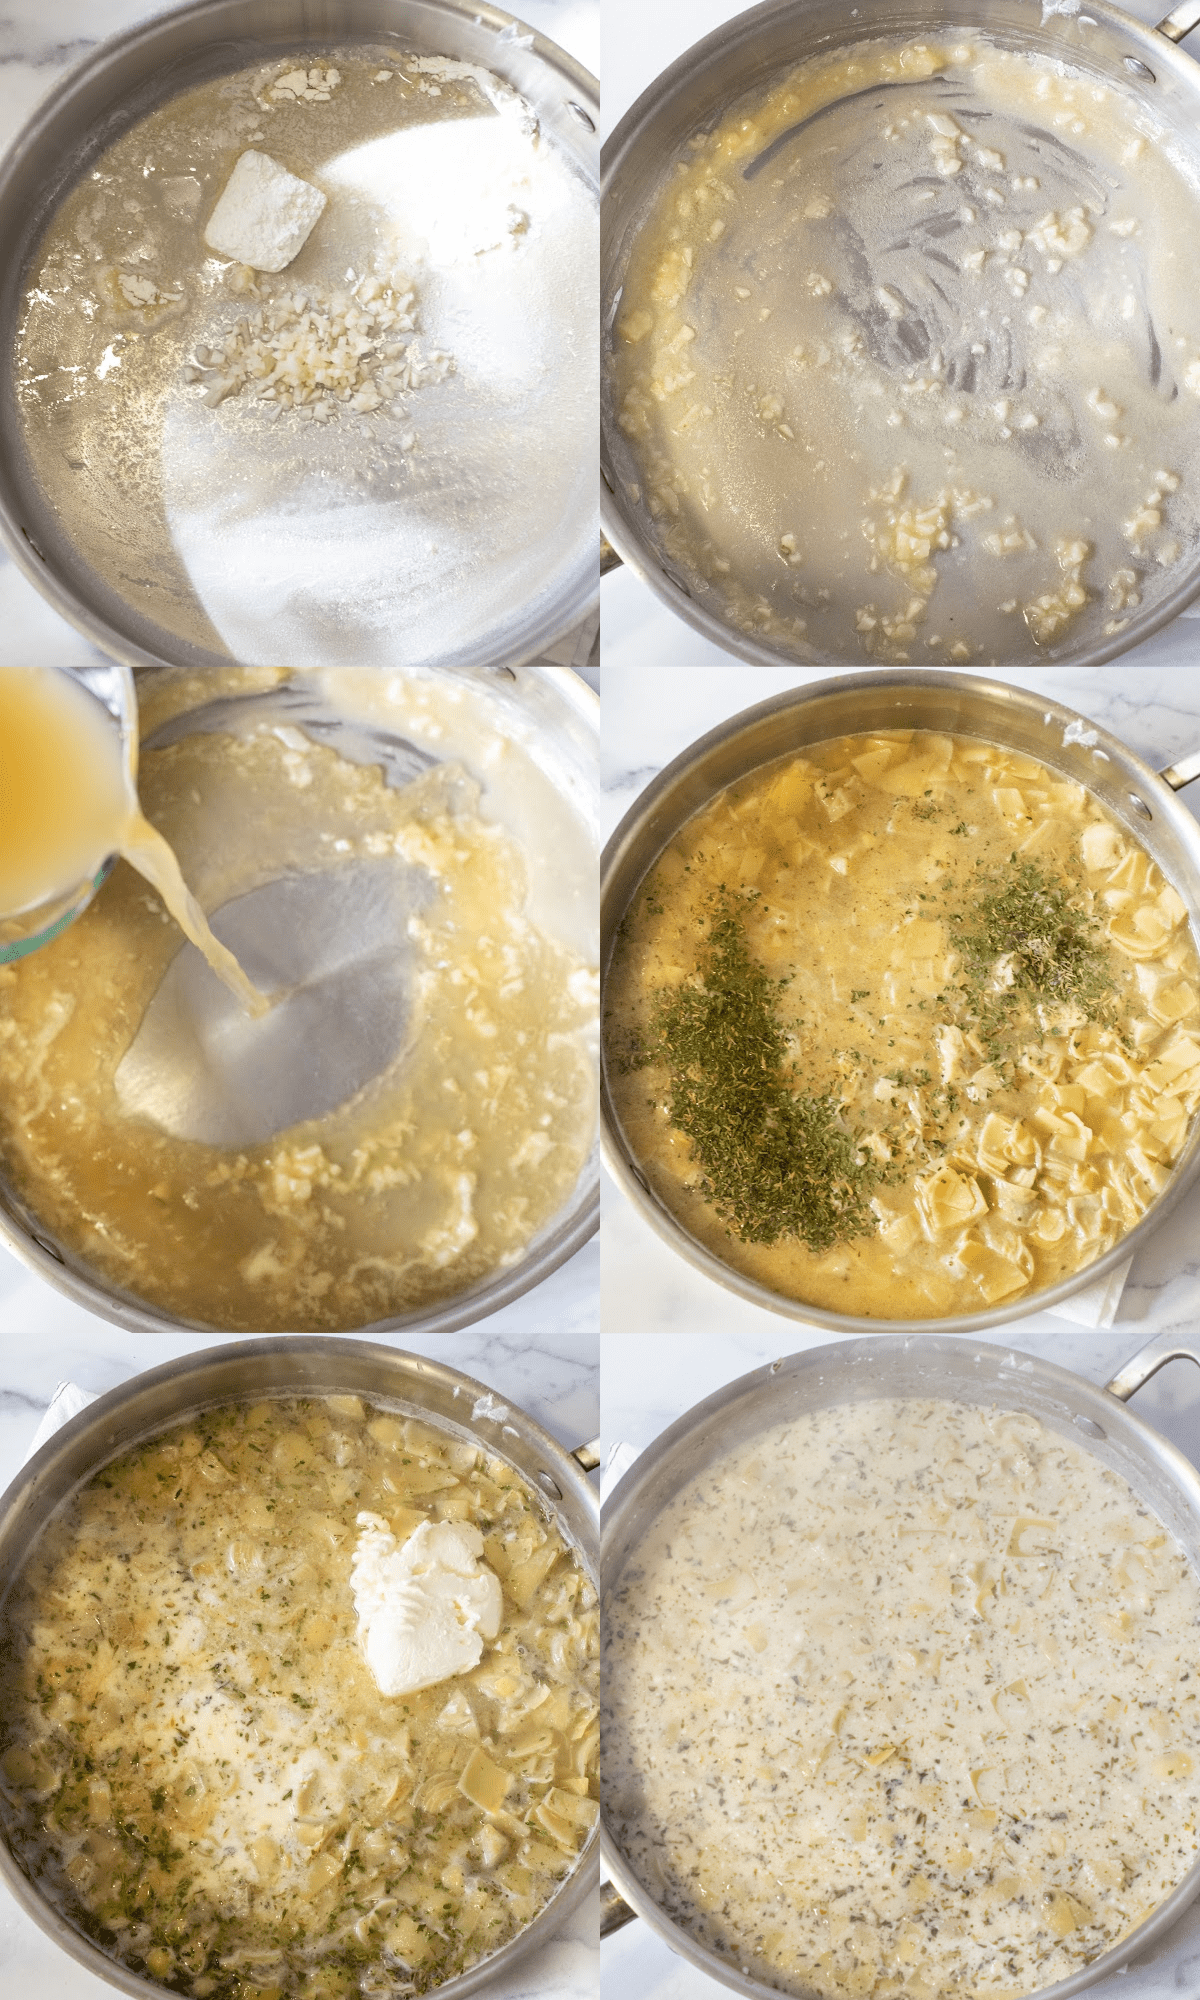 6 pictures of pans with butter and garlic and flour making a roux, then adding stock, then spices and artichokes, cream and cream cheese added, and then all mixed.